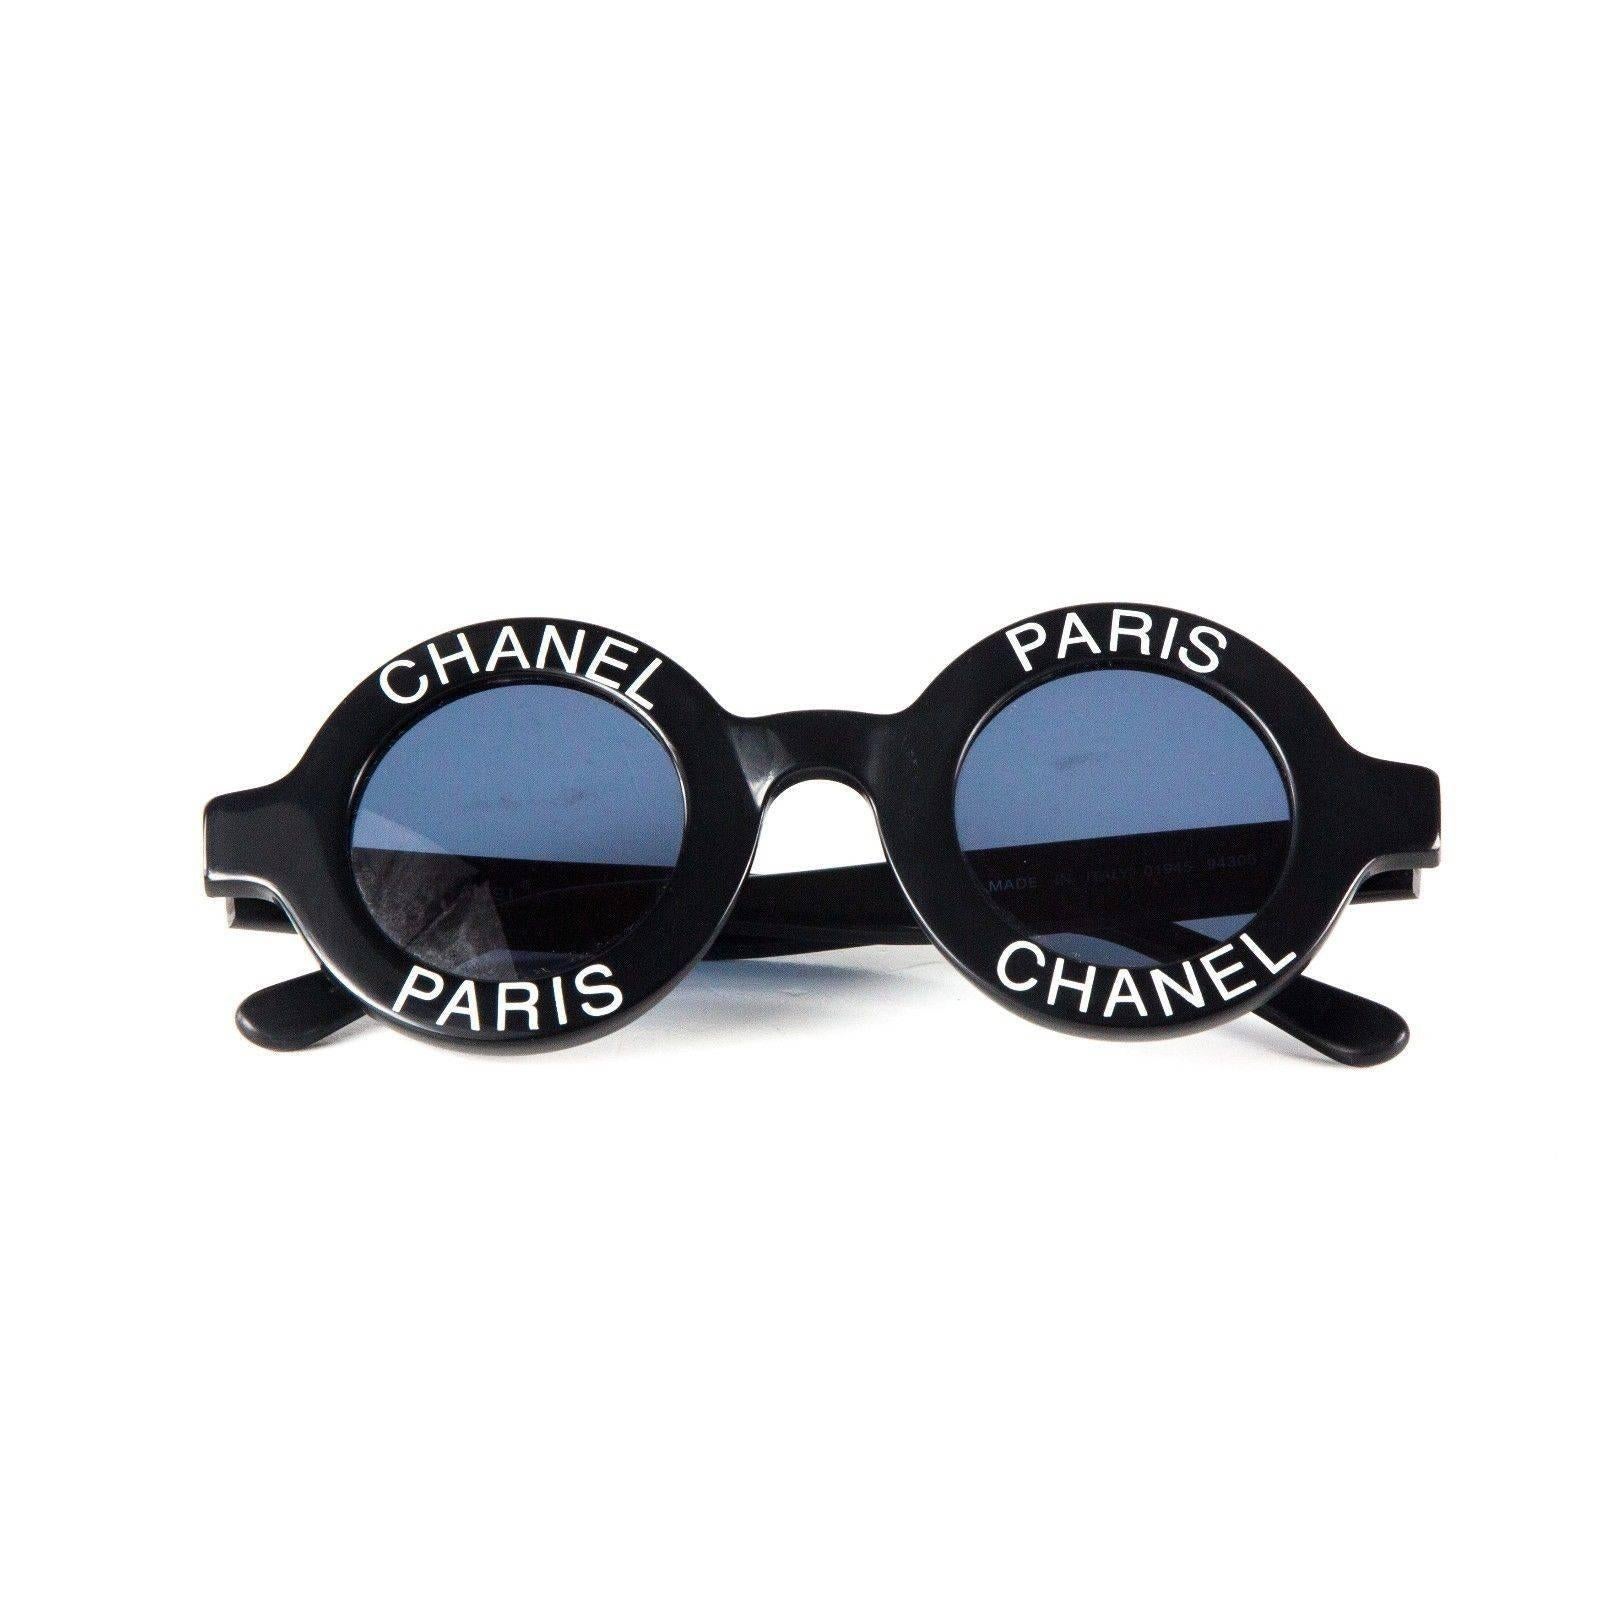 Chanel - Vintage Round Logo Sunglasses

Color: Black

------------------------------------------------------------

Details:

- round frame lenses

- CC logos at temples

- item # AA1445

Condition: Good condition - gently